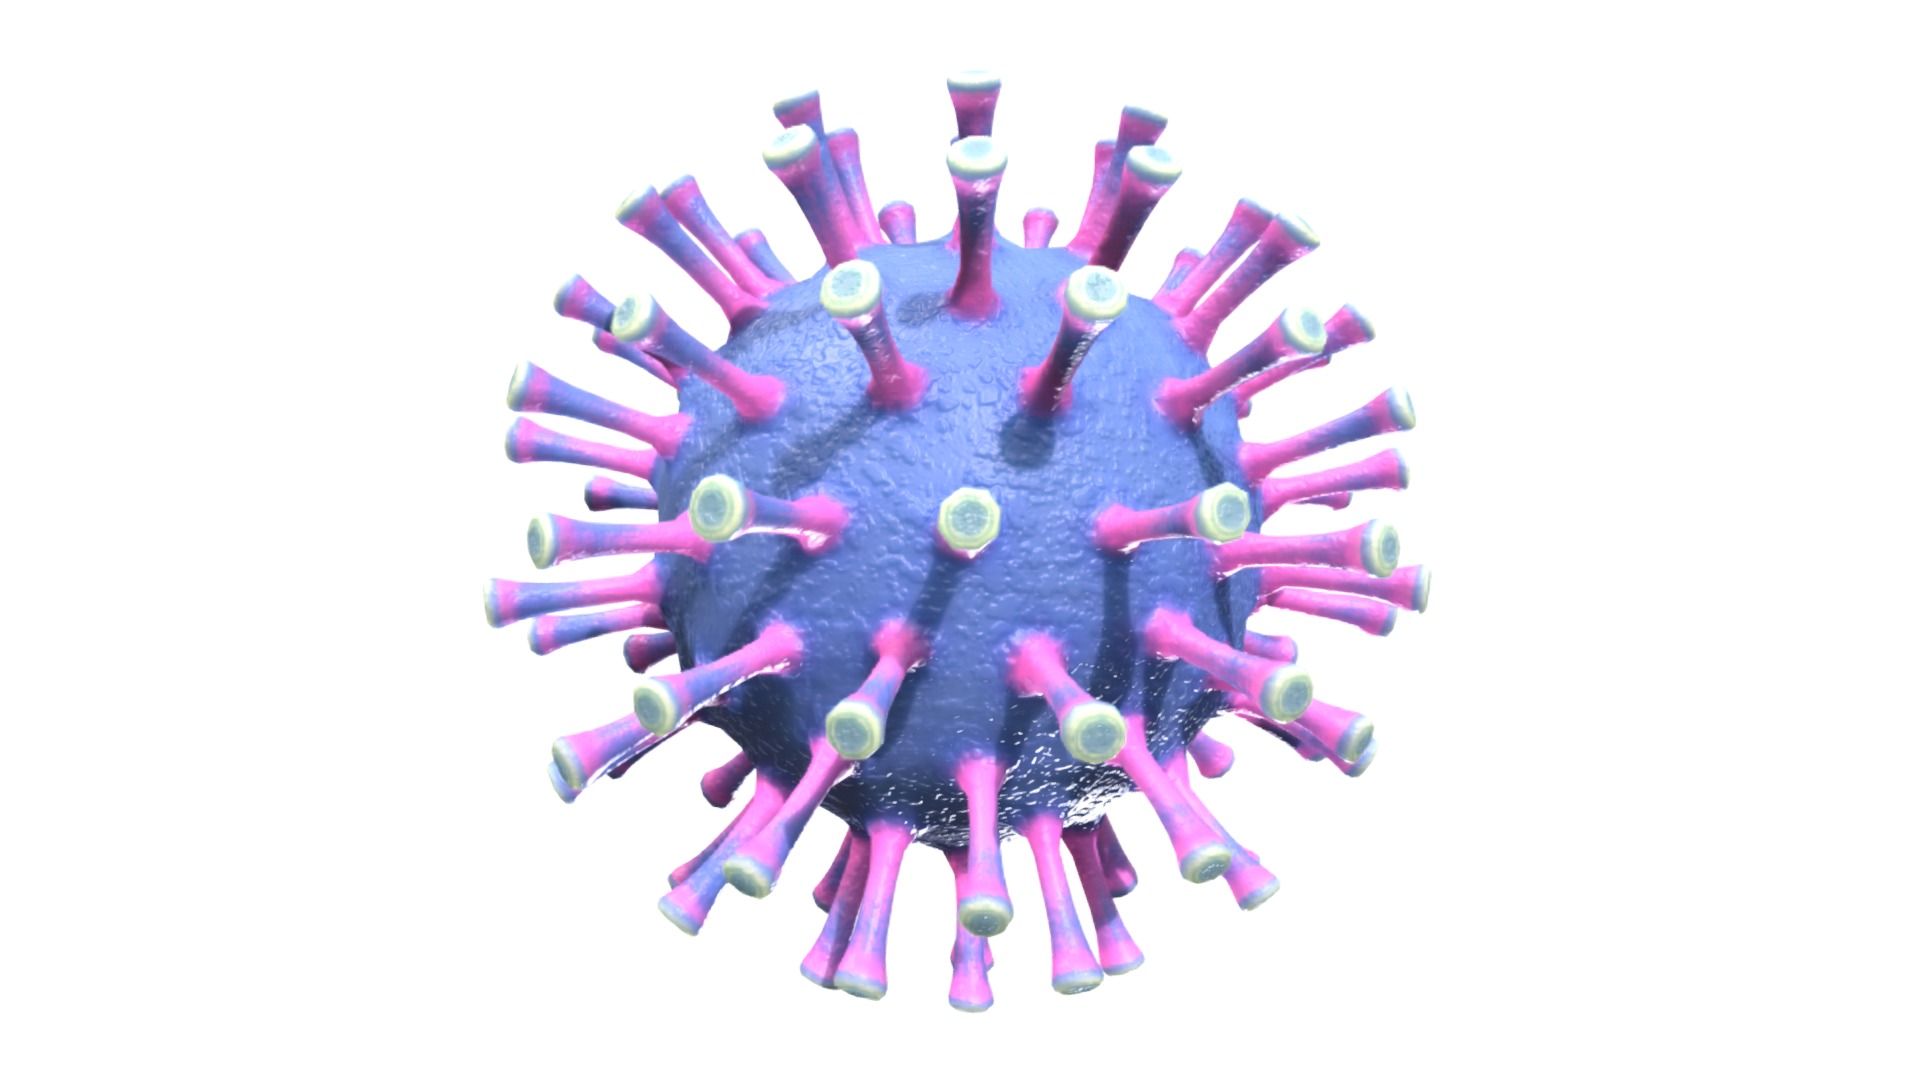 3D model Corona Virus Covid 19 - This is a 3D model of the Corona Virus Covid 19. The 3D model is about a group of colorful objects.